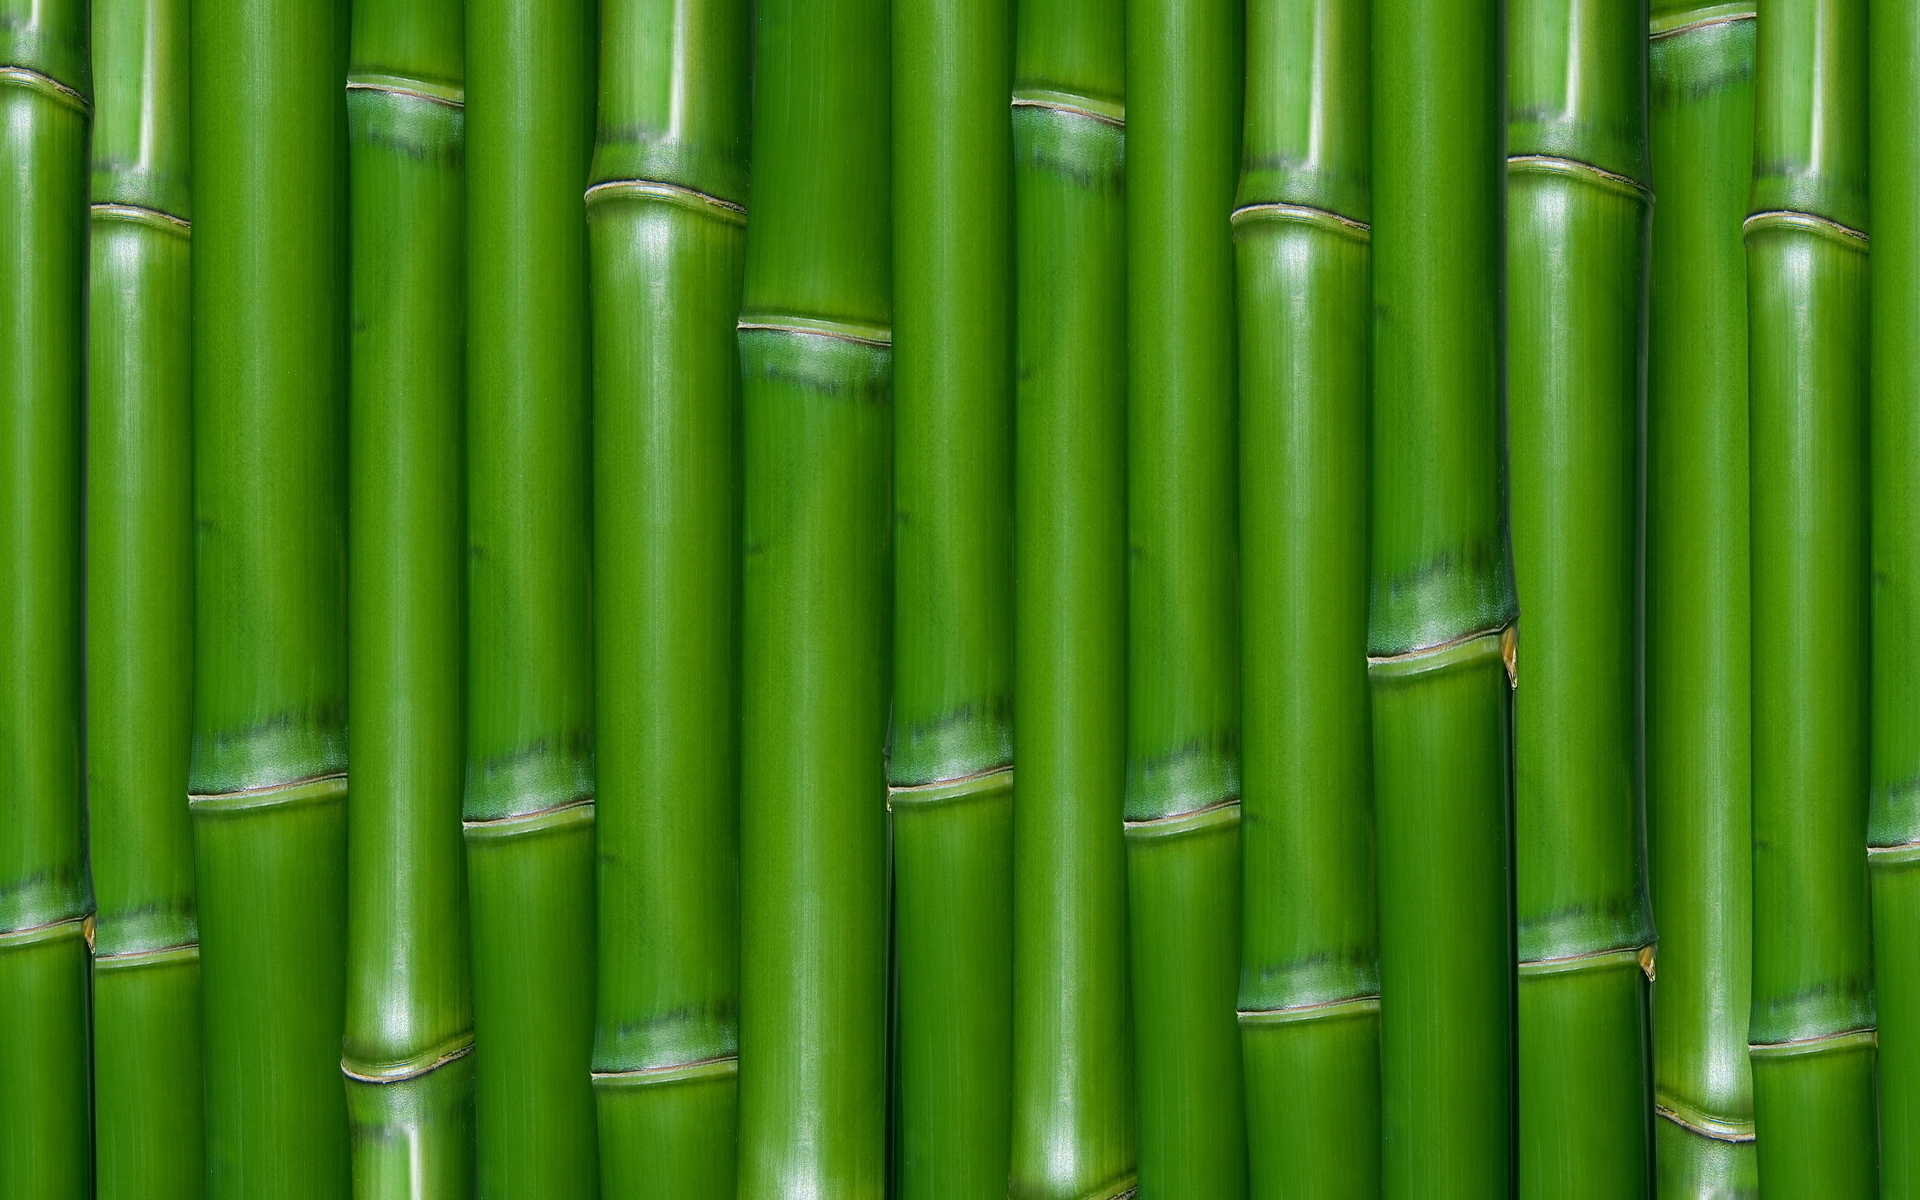 Green bamboo texture - HD wallpaper download. Wallpapers, pictures ...